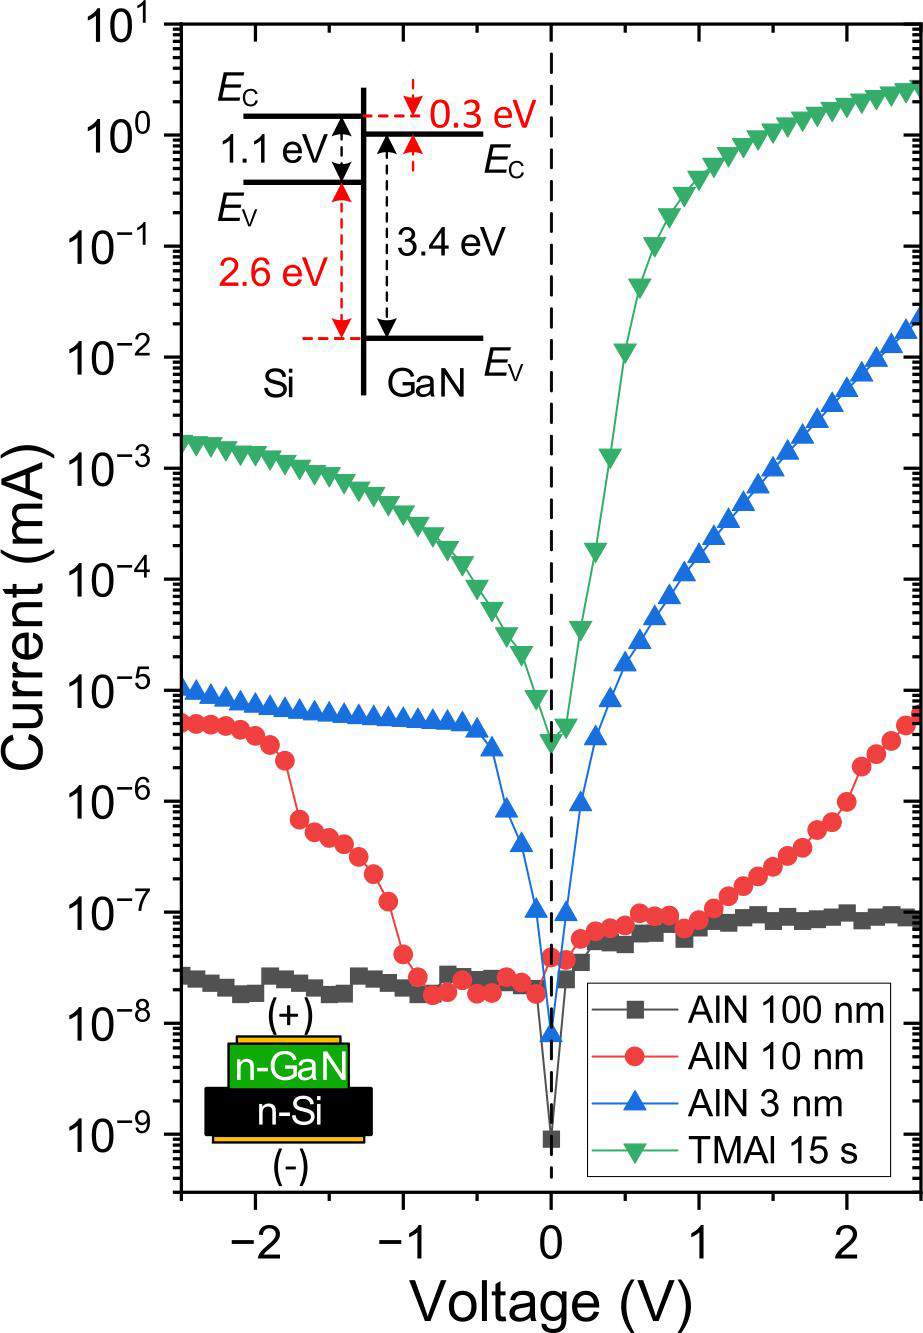 Figure 3: Current–voltage (I–V) measurements of n-GaN/n-Si heterostructures, directly grown with 15s TMAl preflow (green), and with conventional AlN buffers. Forward bias refers to positive voltage applied to n-GaN (bottom-left inset). Top-left inset schematically represents band alignment of GaN and Si.